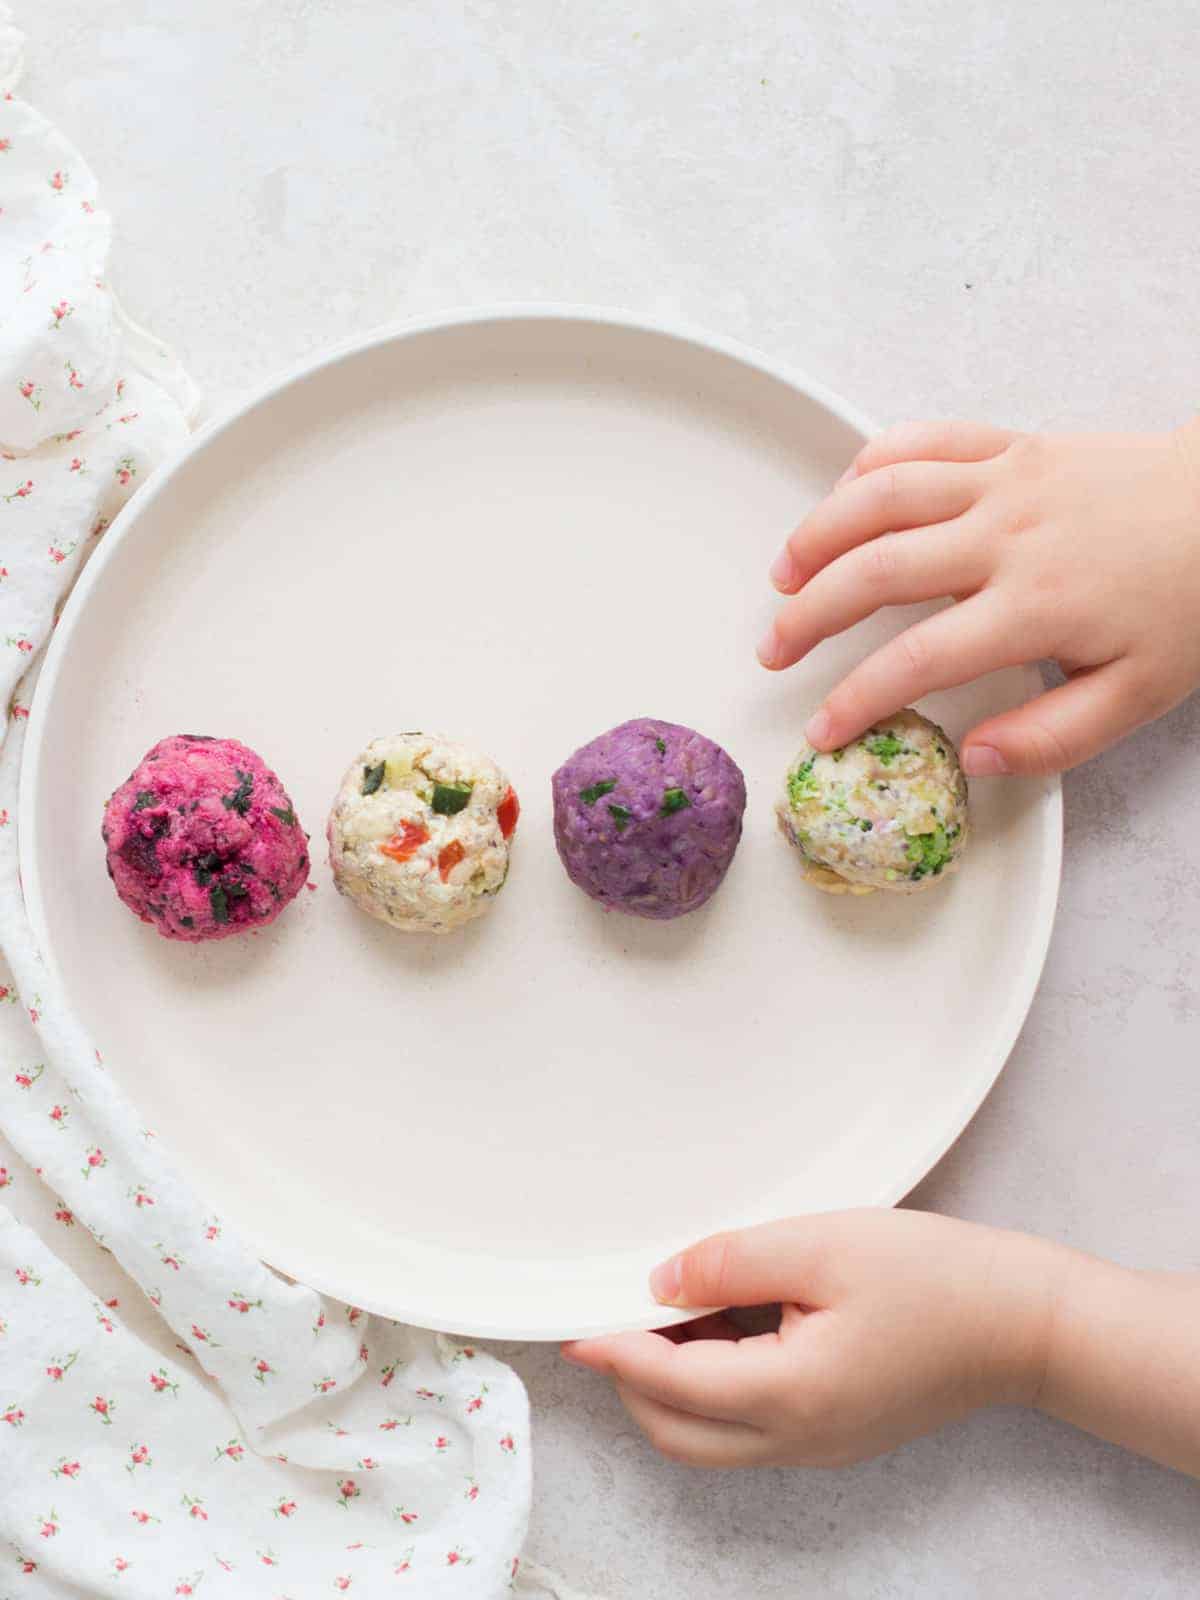 four oatmeal with vegetables rolled into balls with a baby's hand touching one.